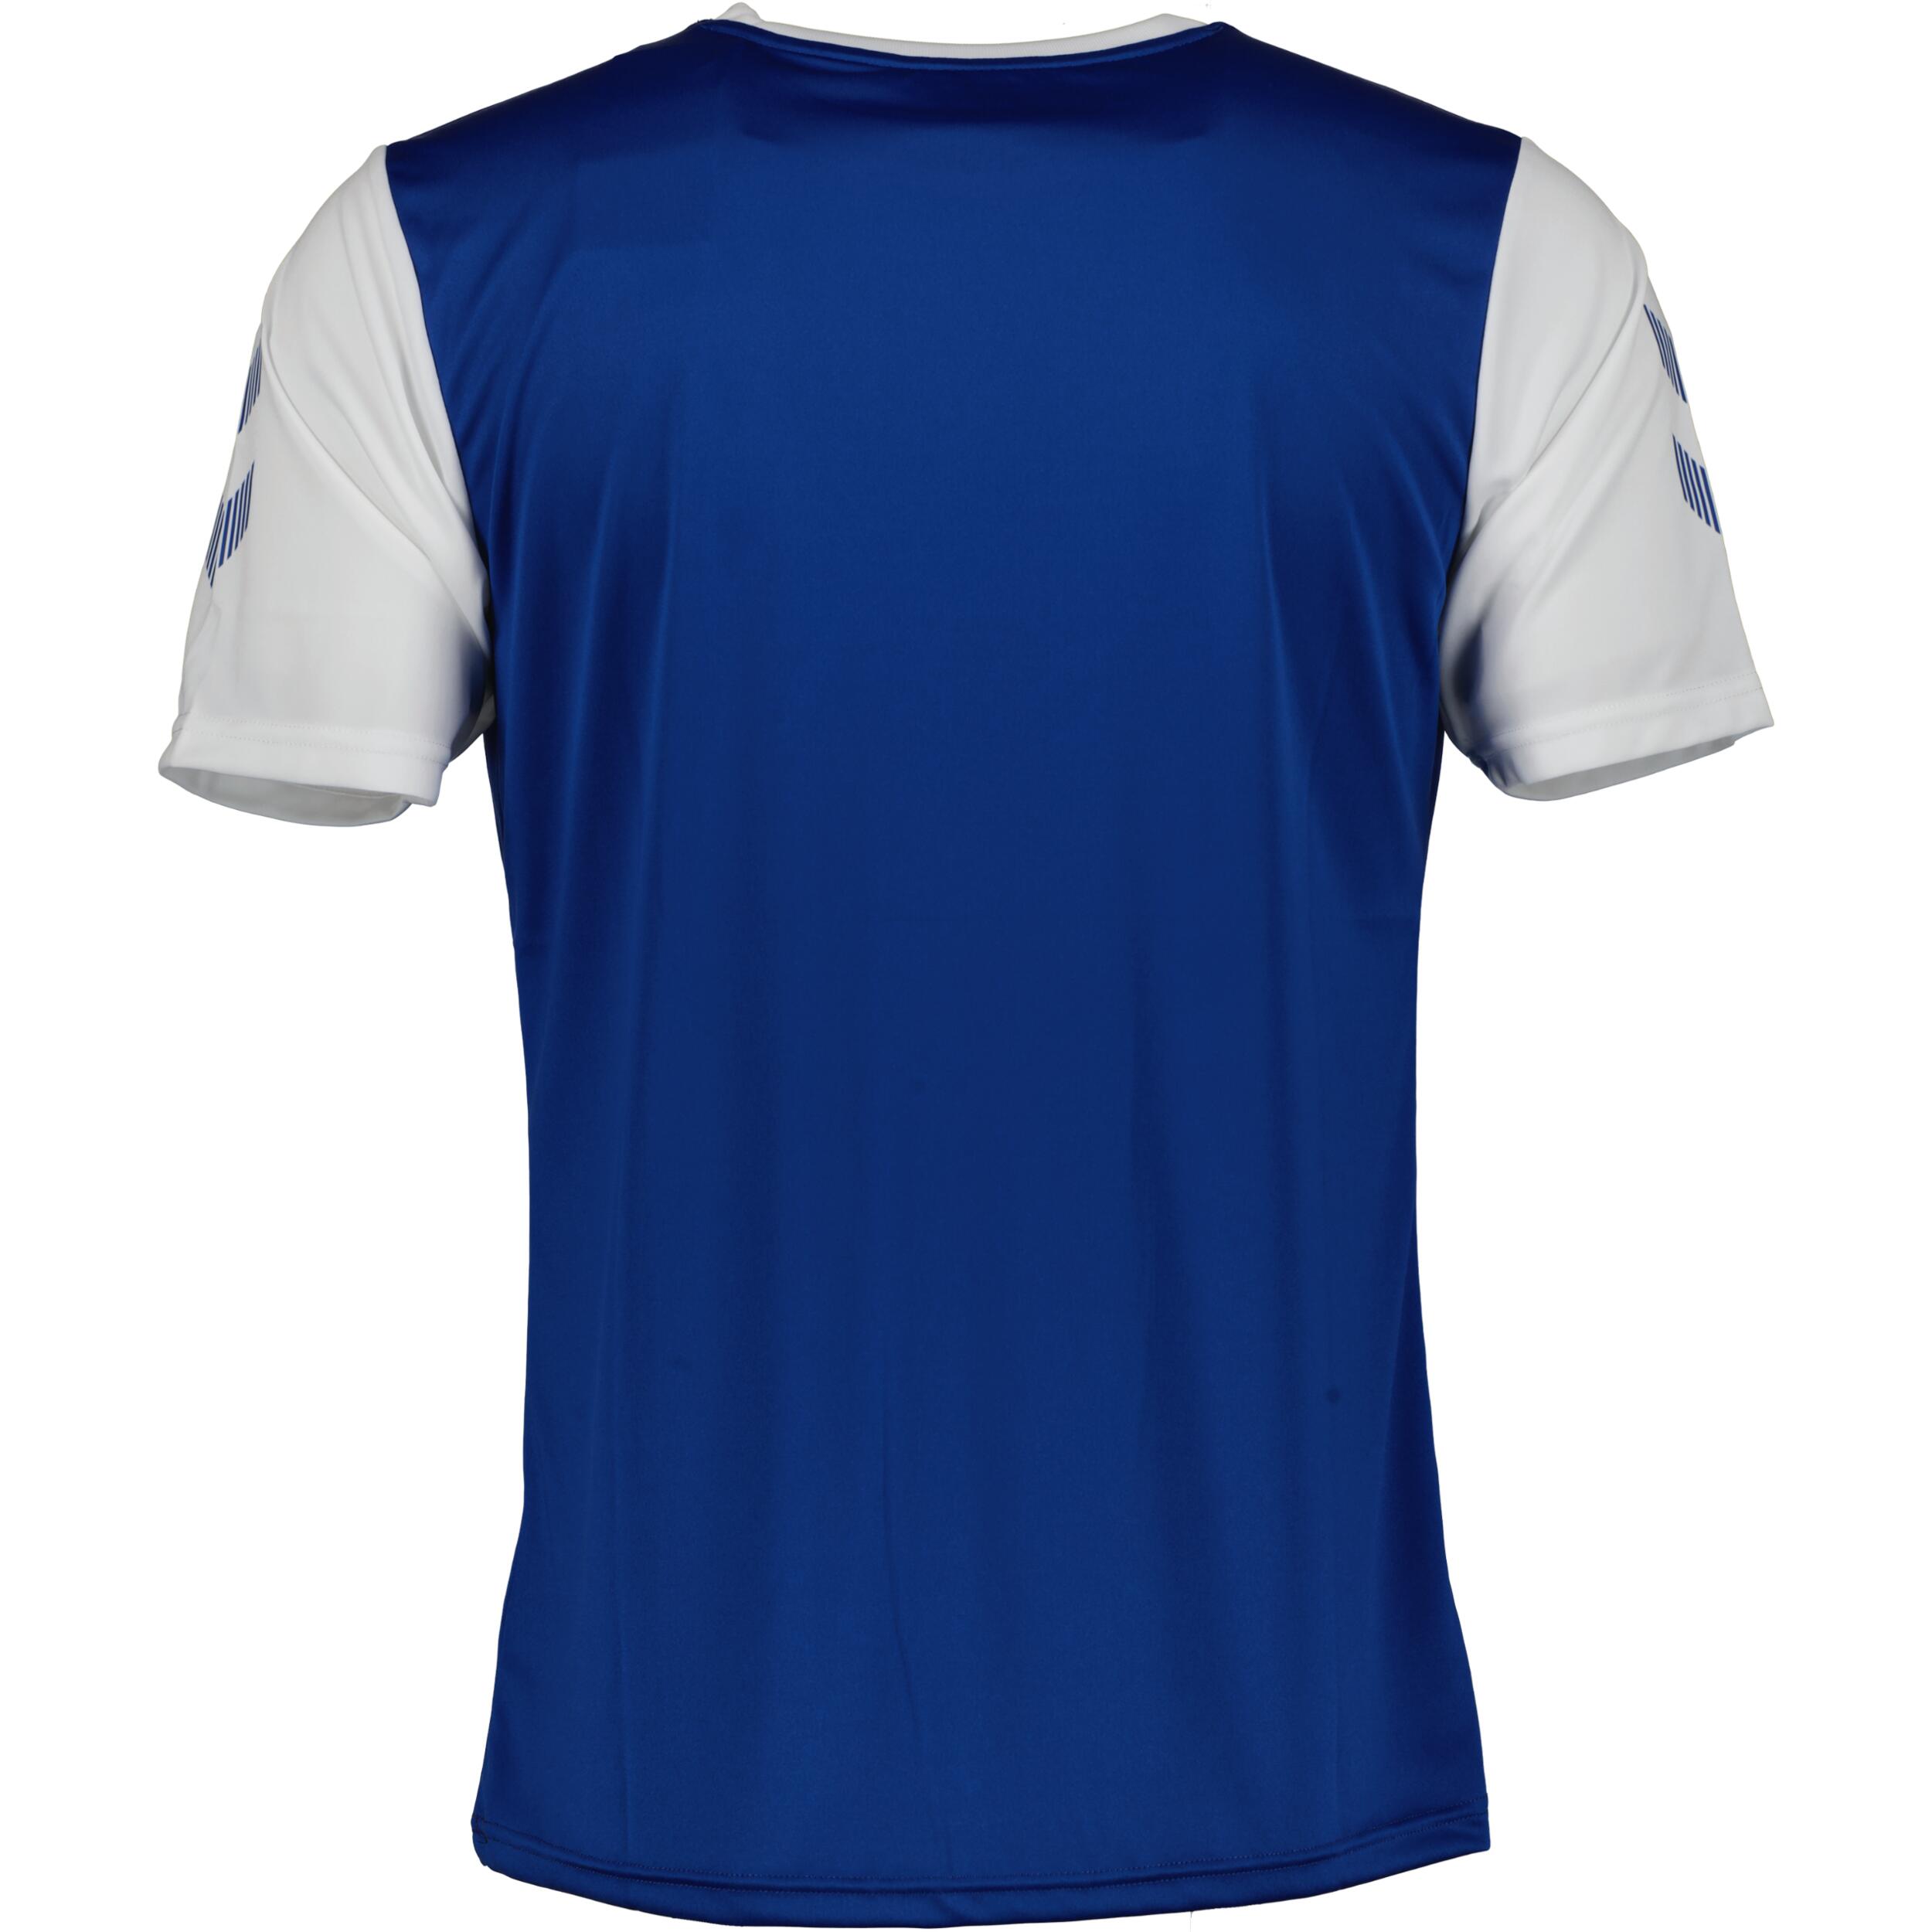 Match jersey for men, great for football, in blue/white 2/3